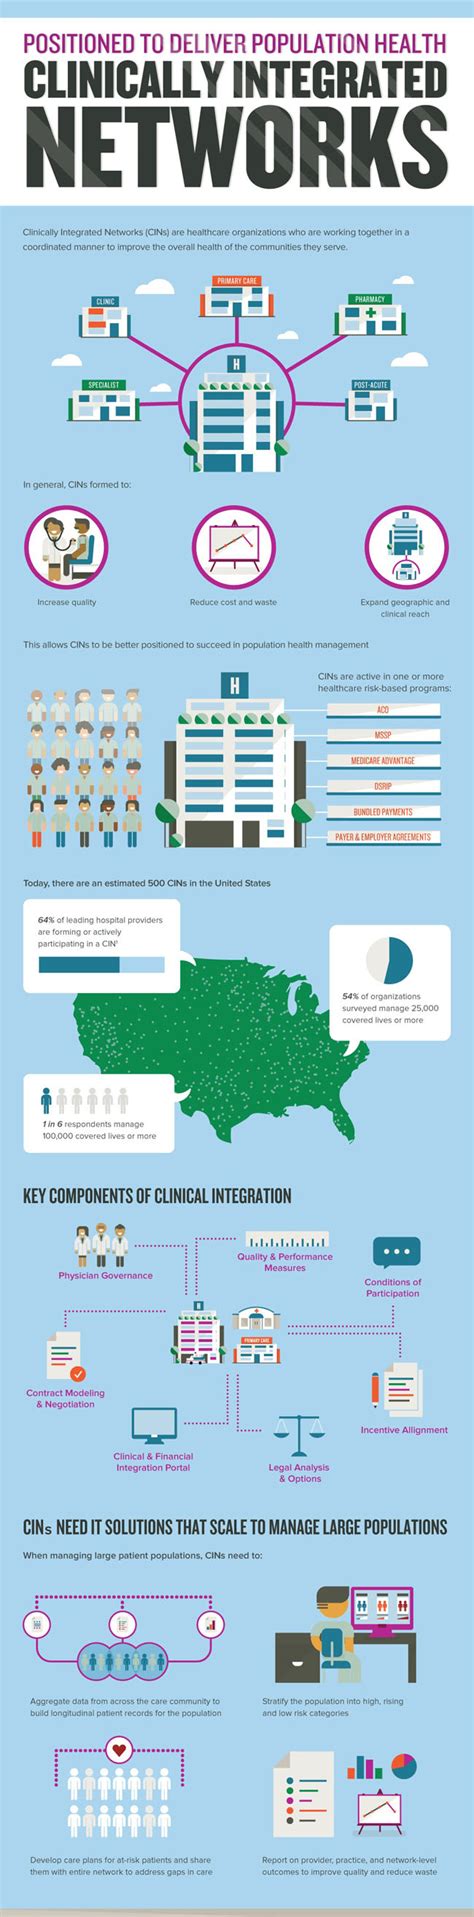 Clinically Integrated Networks Infographic